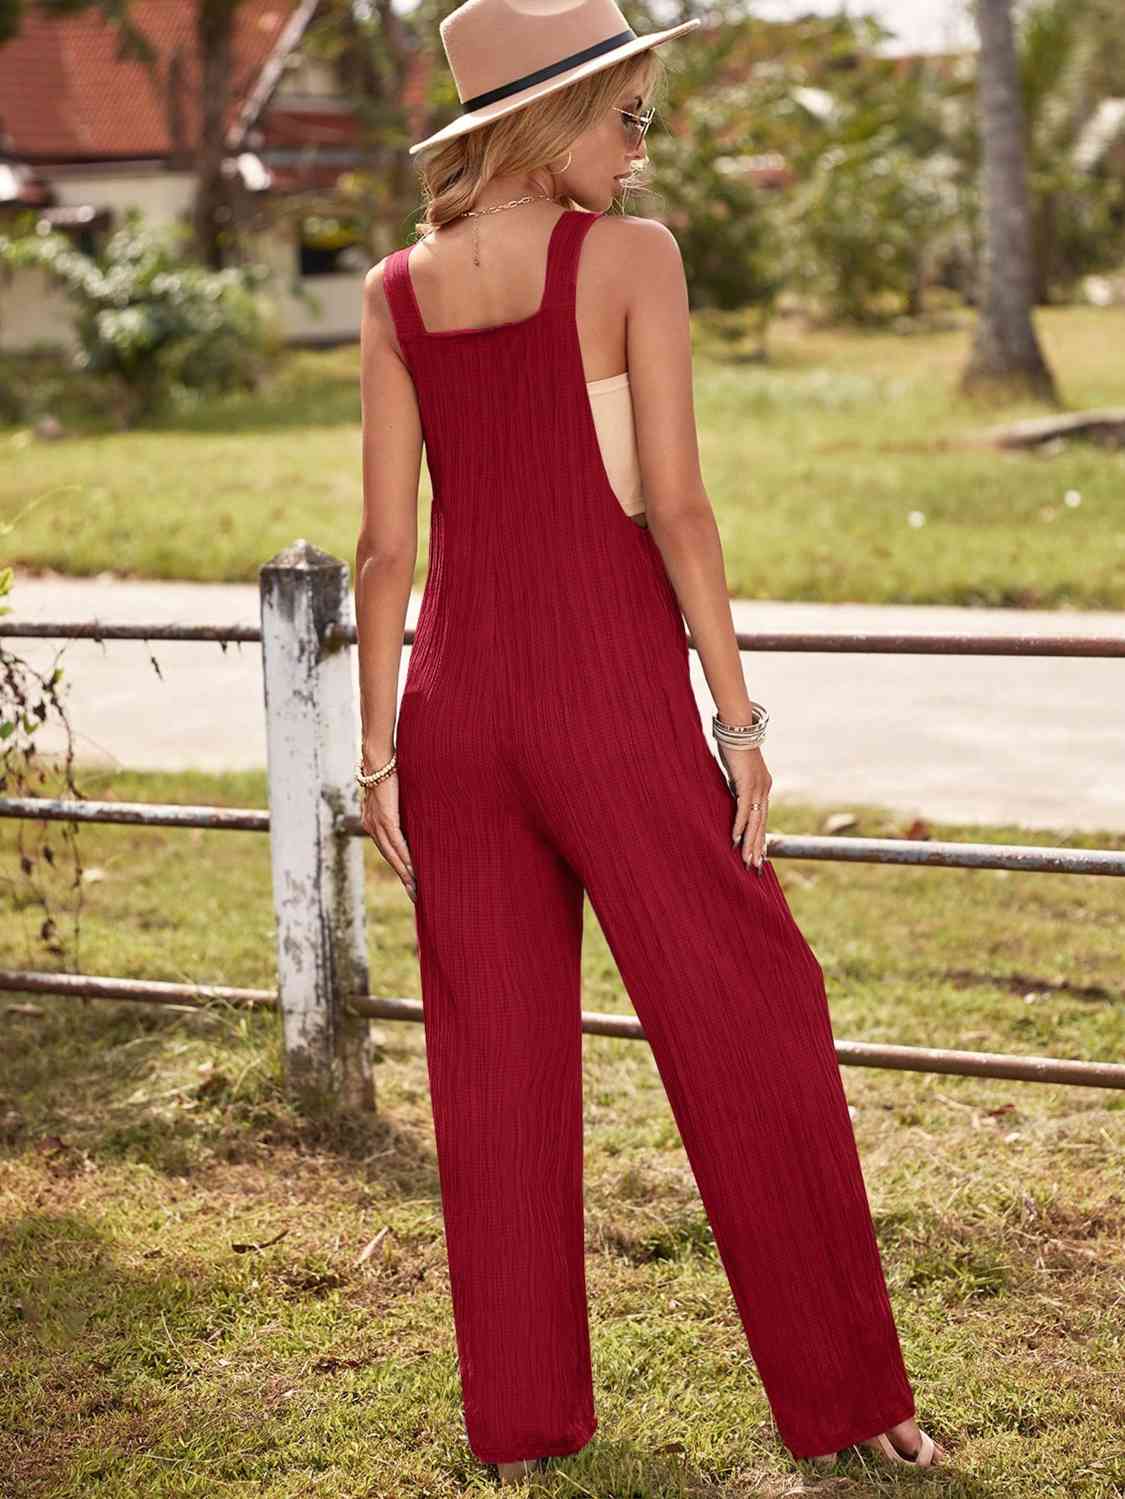 Round Neck Sleeveless Jumpsuit with Pockets - Global Village Kailua Boutique